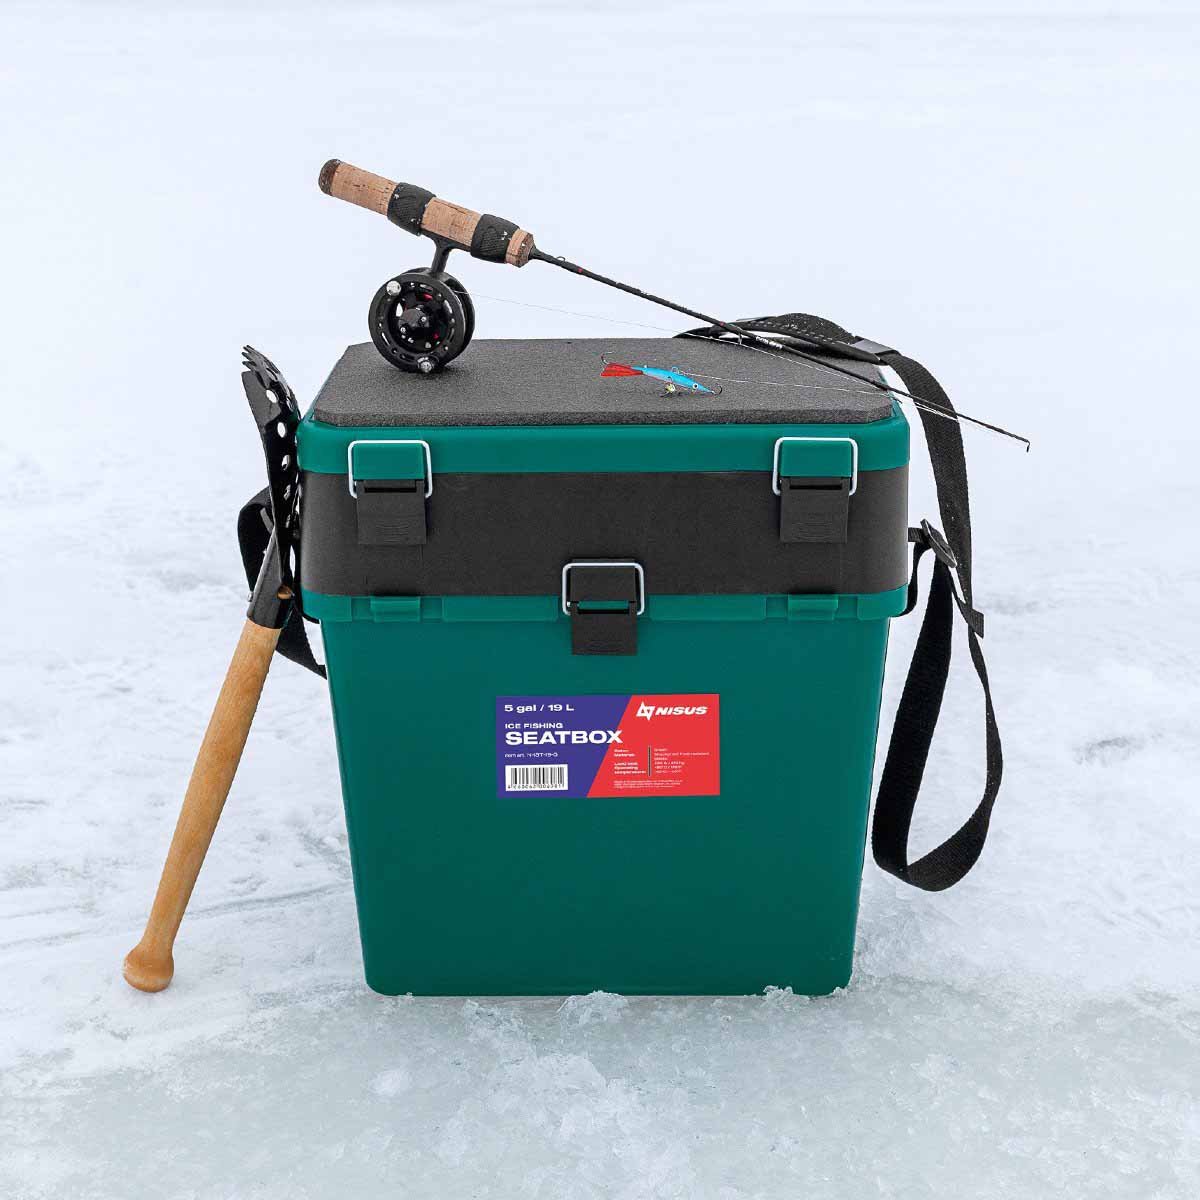 Ice Fishing Bucket Type Box with Seat and Adjustable Shoulder Strap could carry a rod and reel combo and an ice fishing skimmer easily